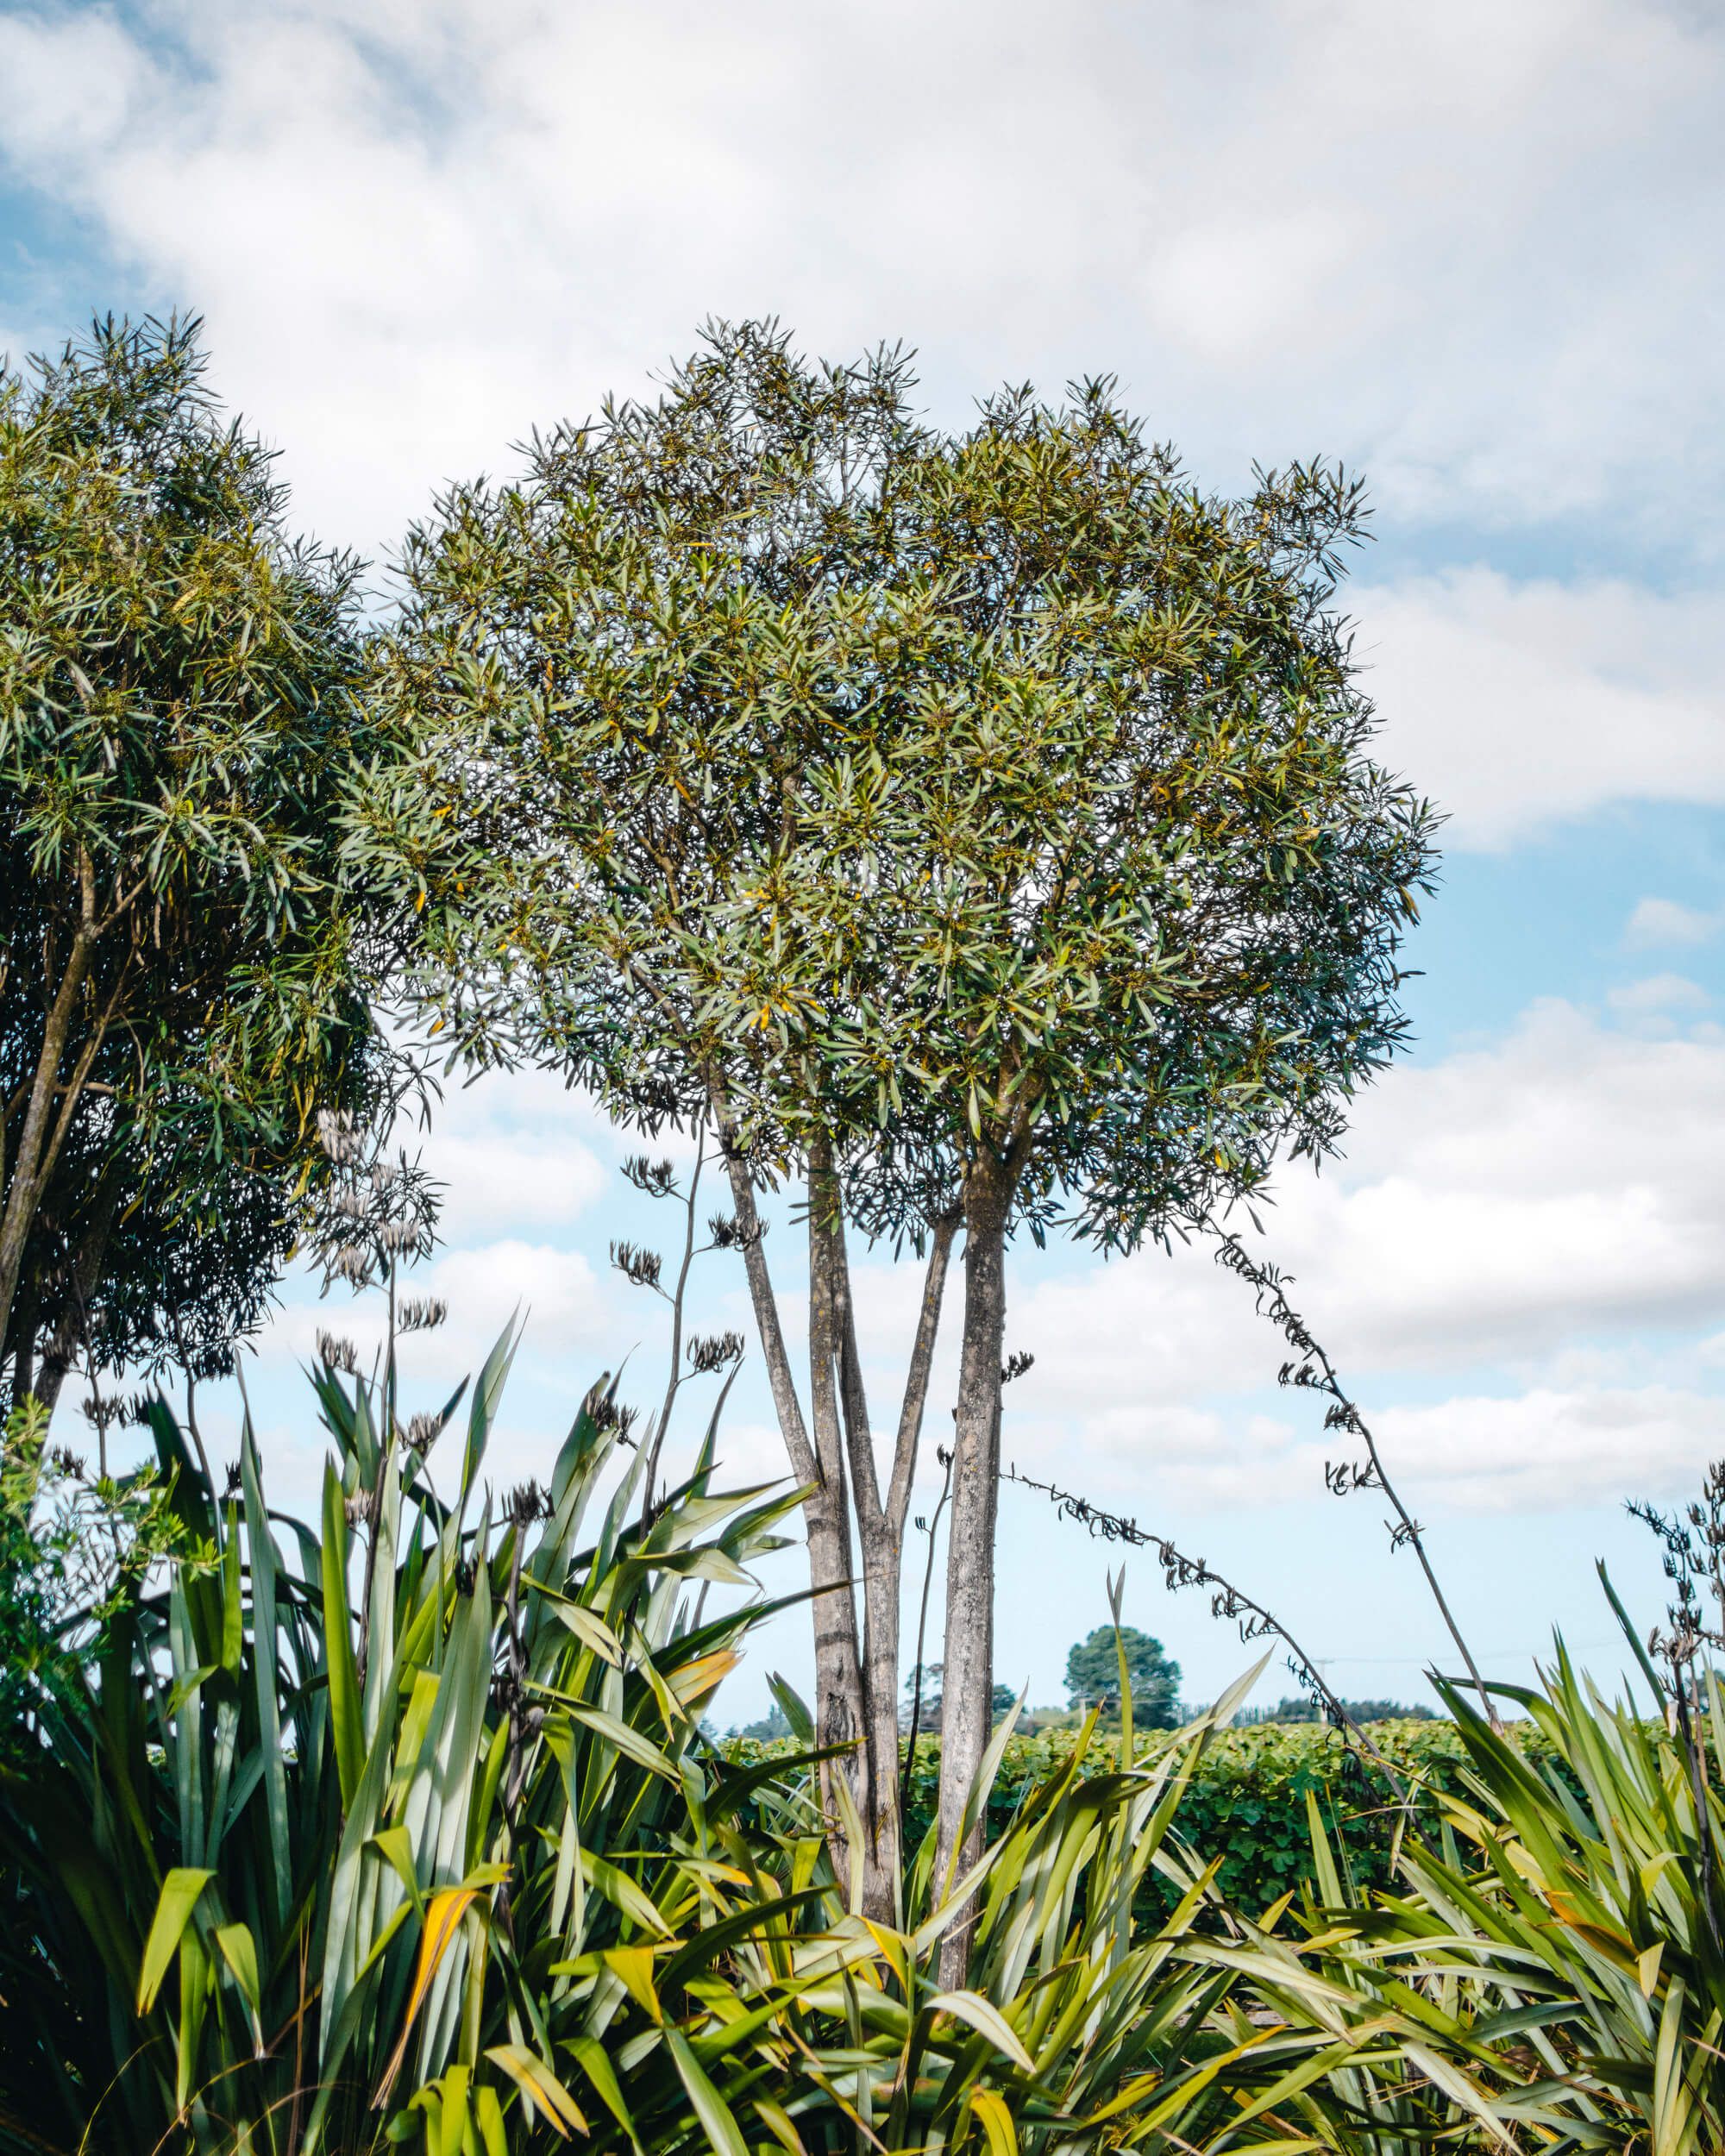 Tall lancewood tree in the vineyards